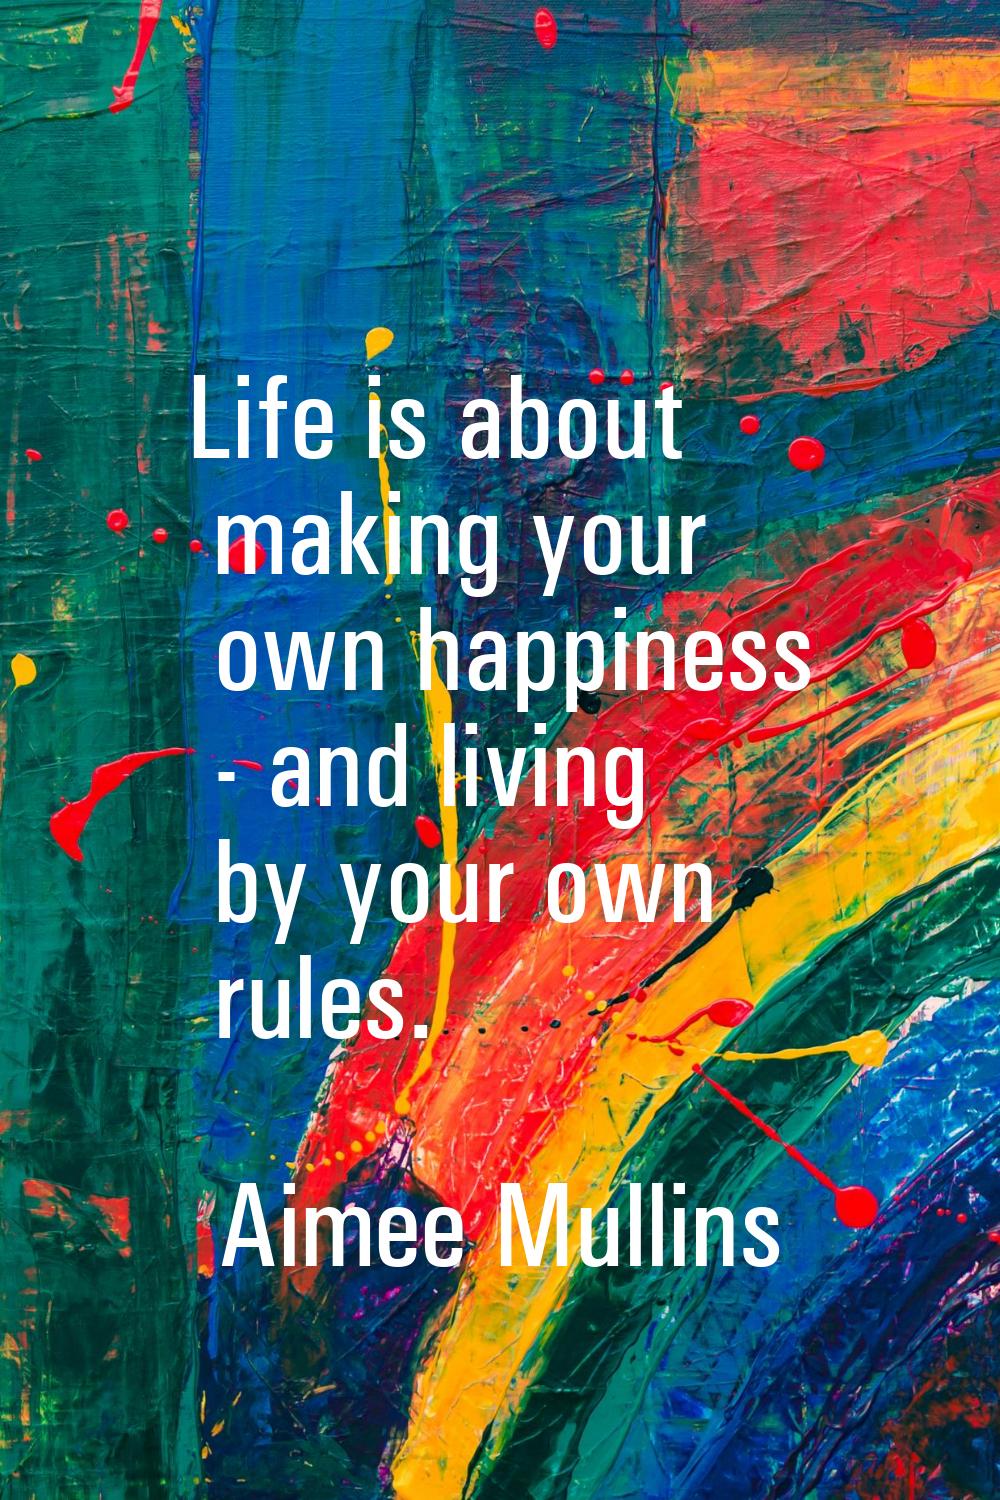 Life is about making your own happiness - and living by your own rules.